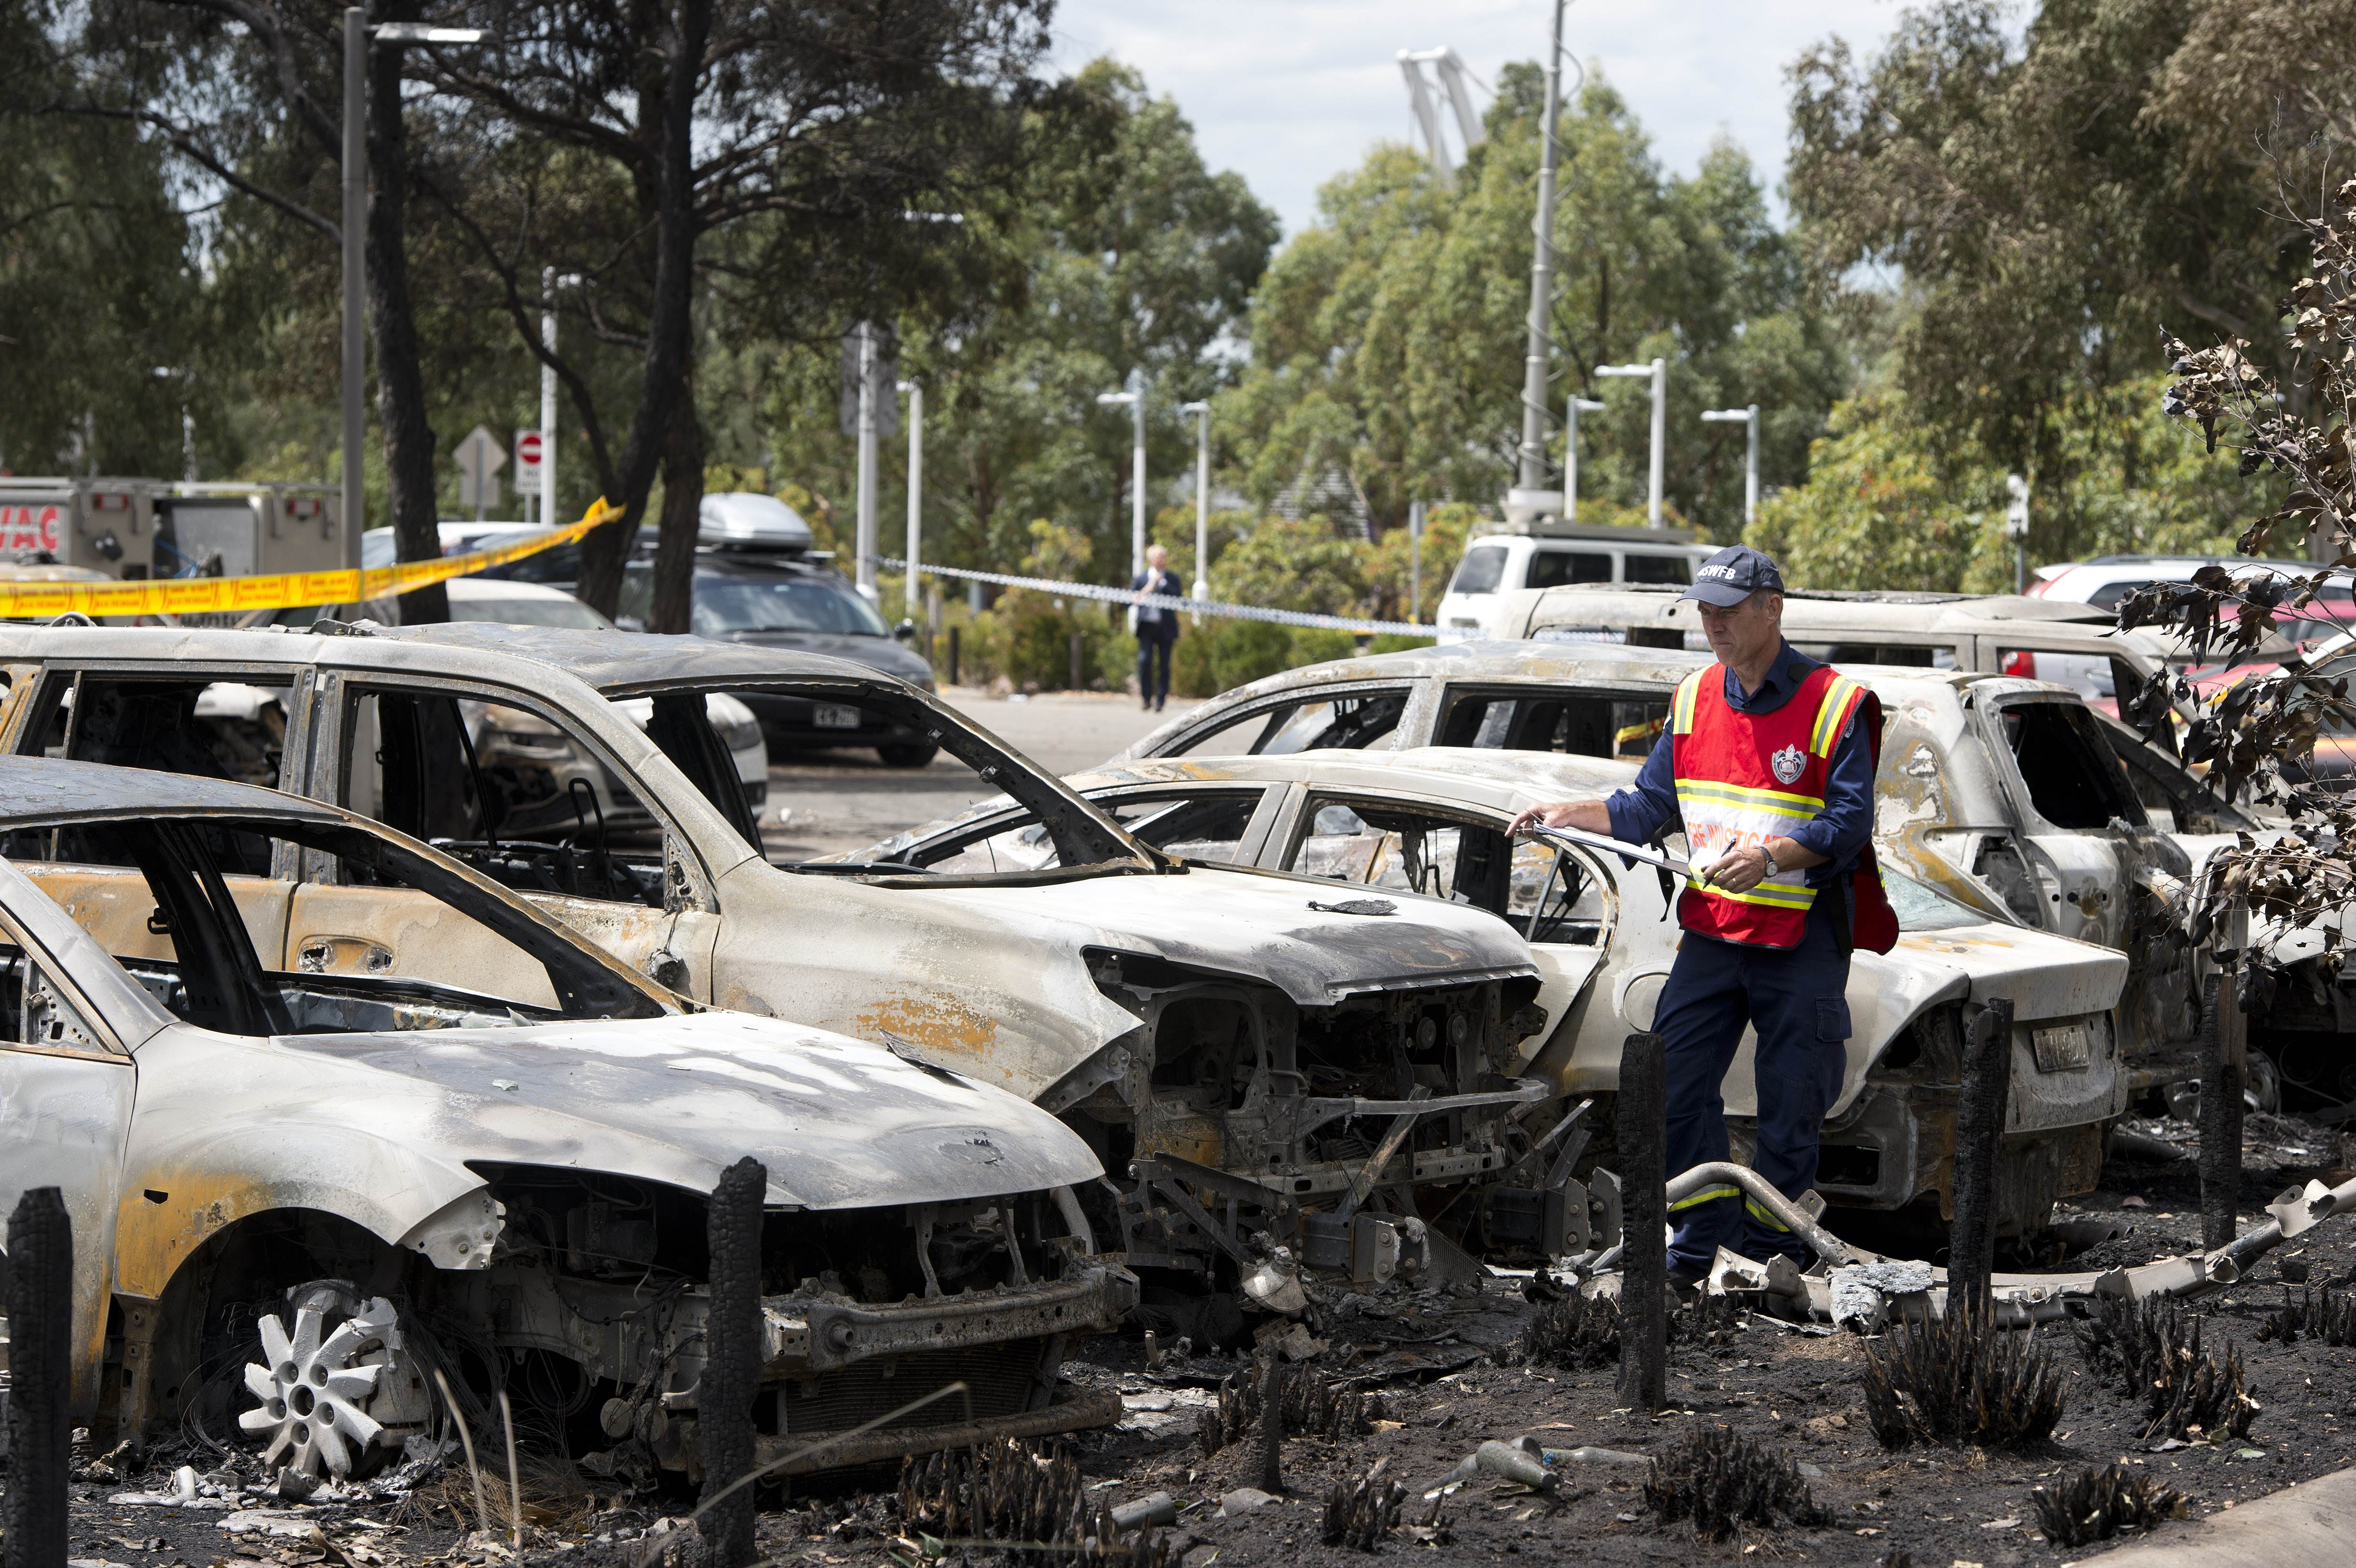 A fire investigator examines burnt vehicles following a fire at Sydney's Olympic Park. Photo: AFP